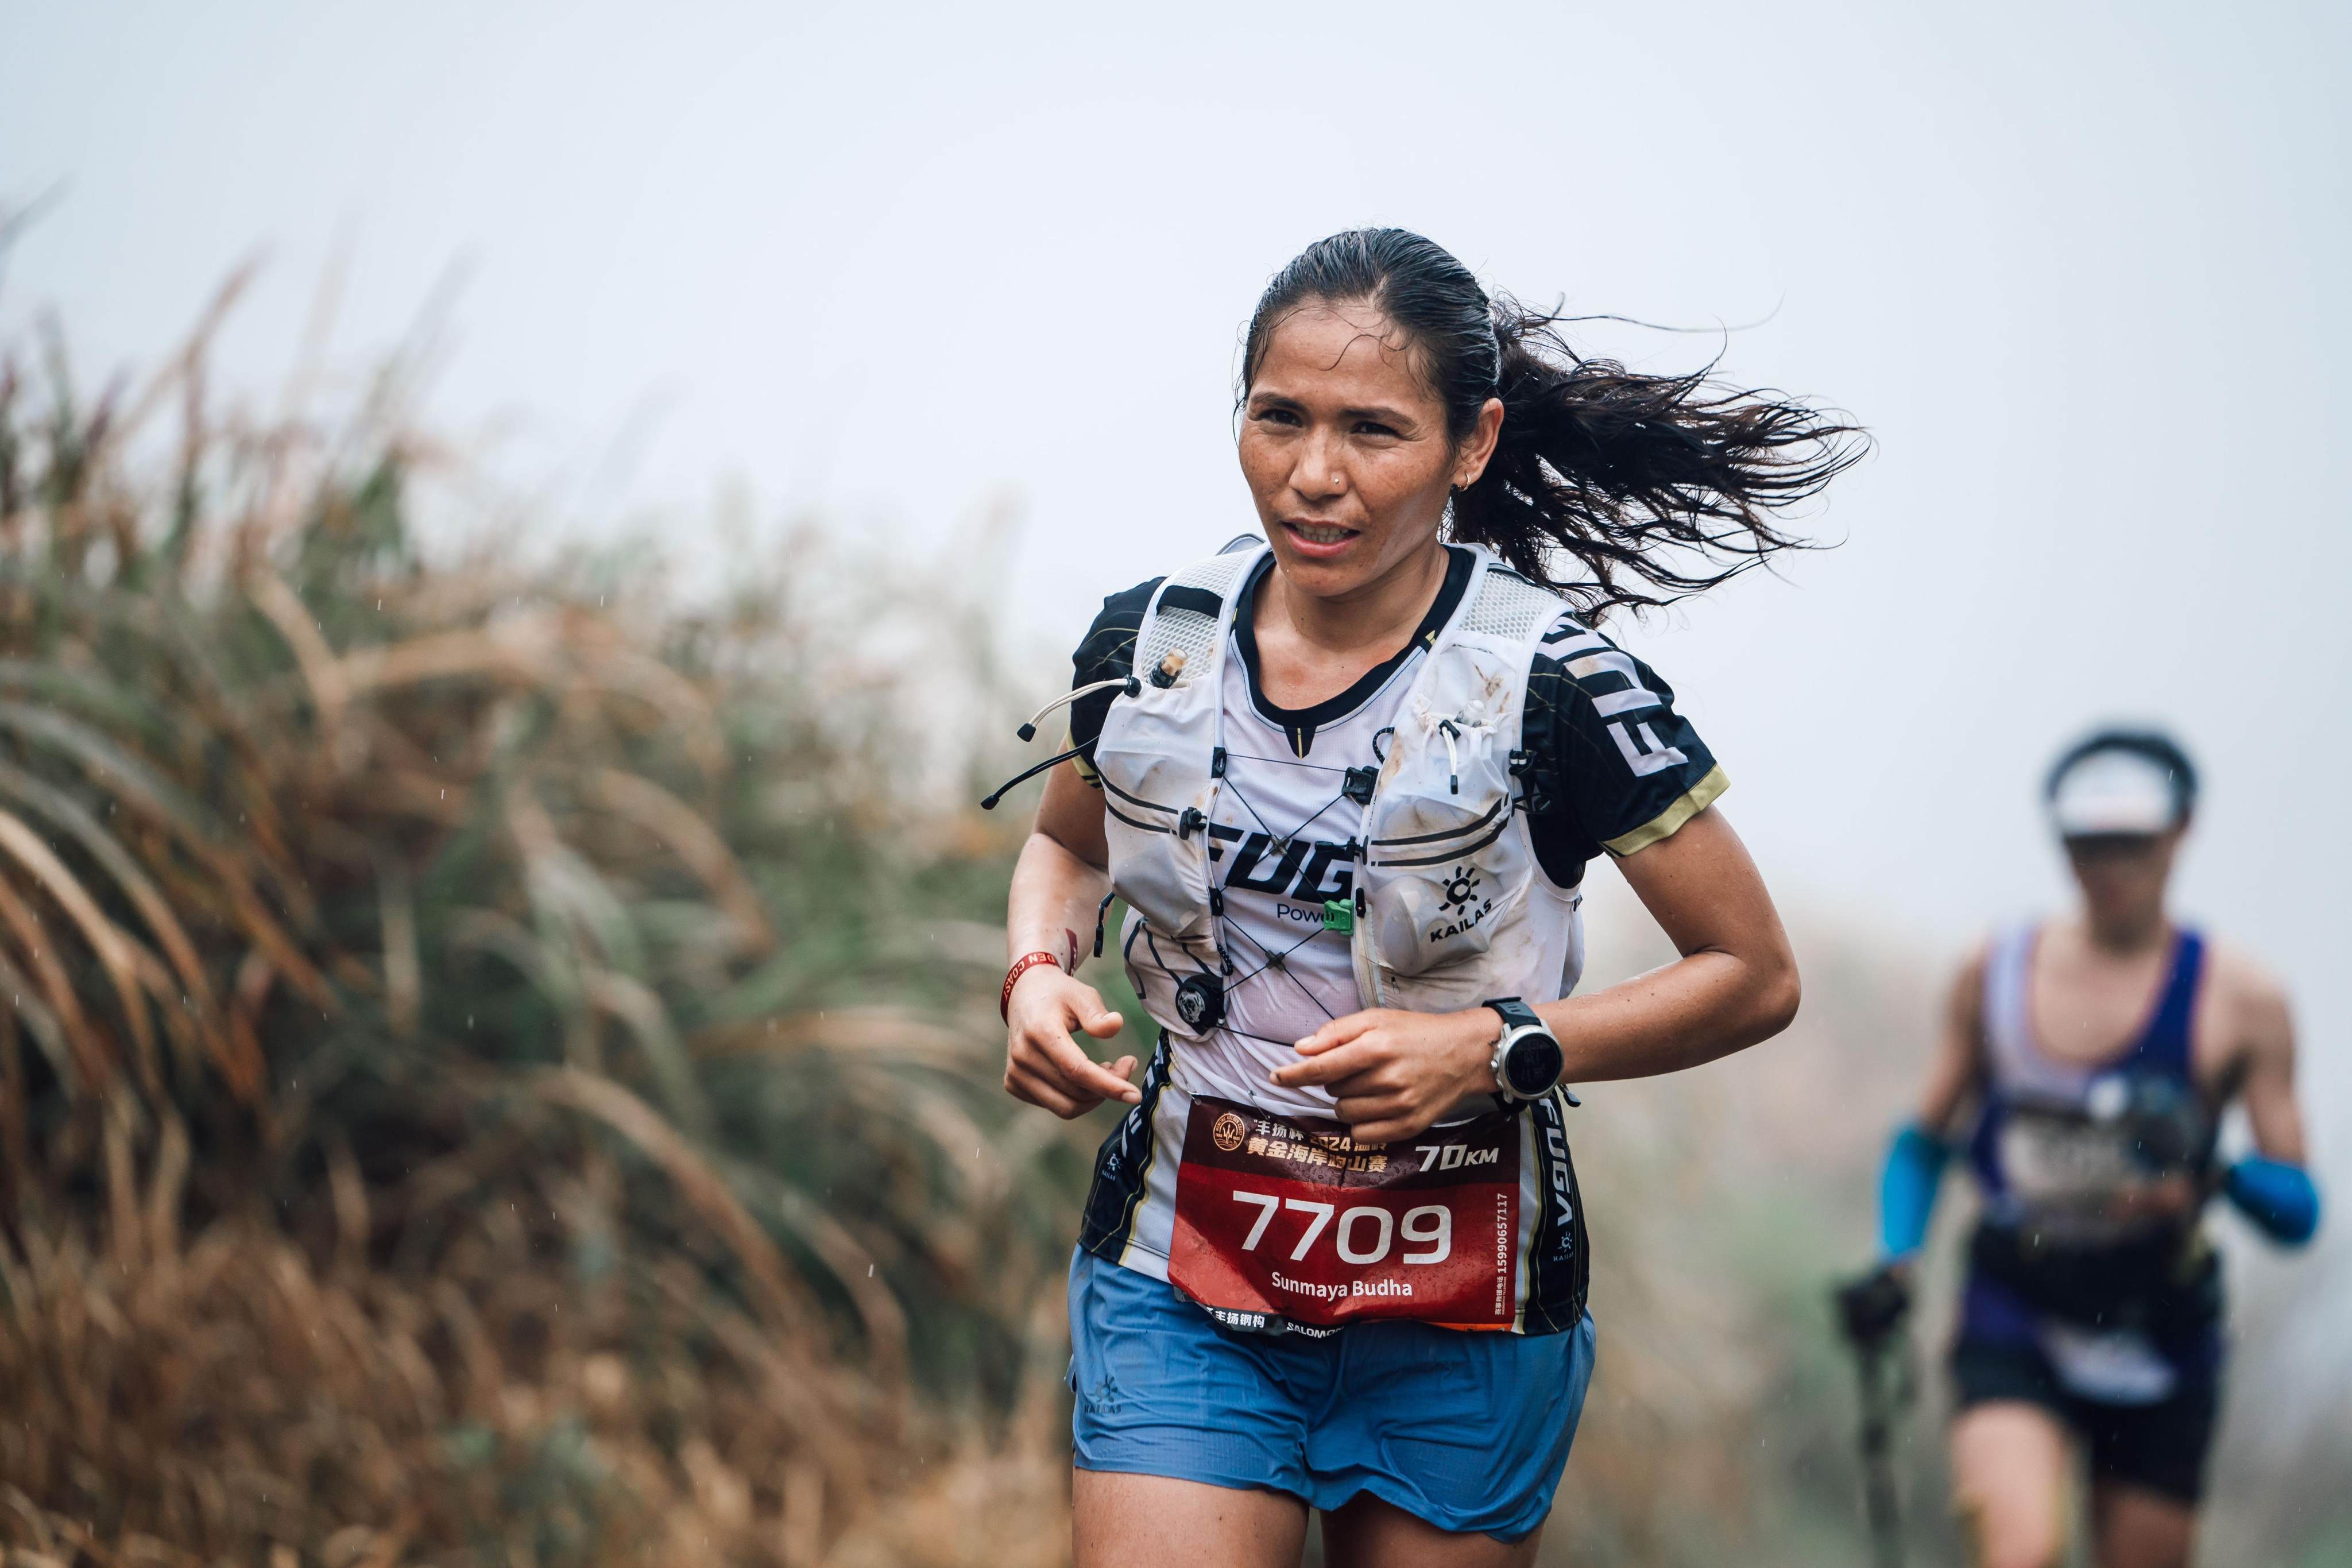 Sunmaya Budha on her way to a nine second victory in the Wenling Golden Coast Trail Race. Photo: Naden81